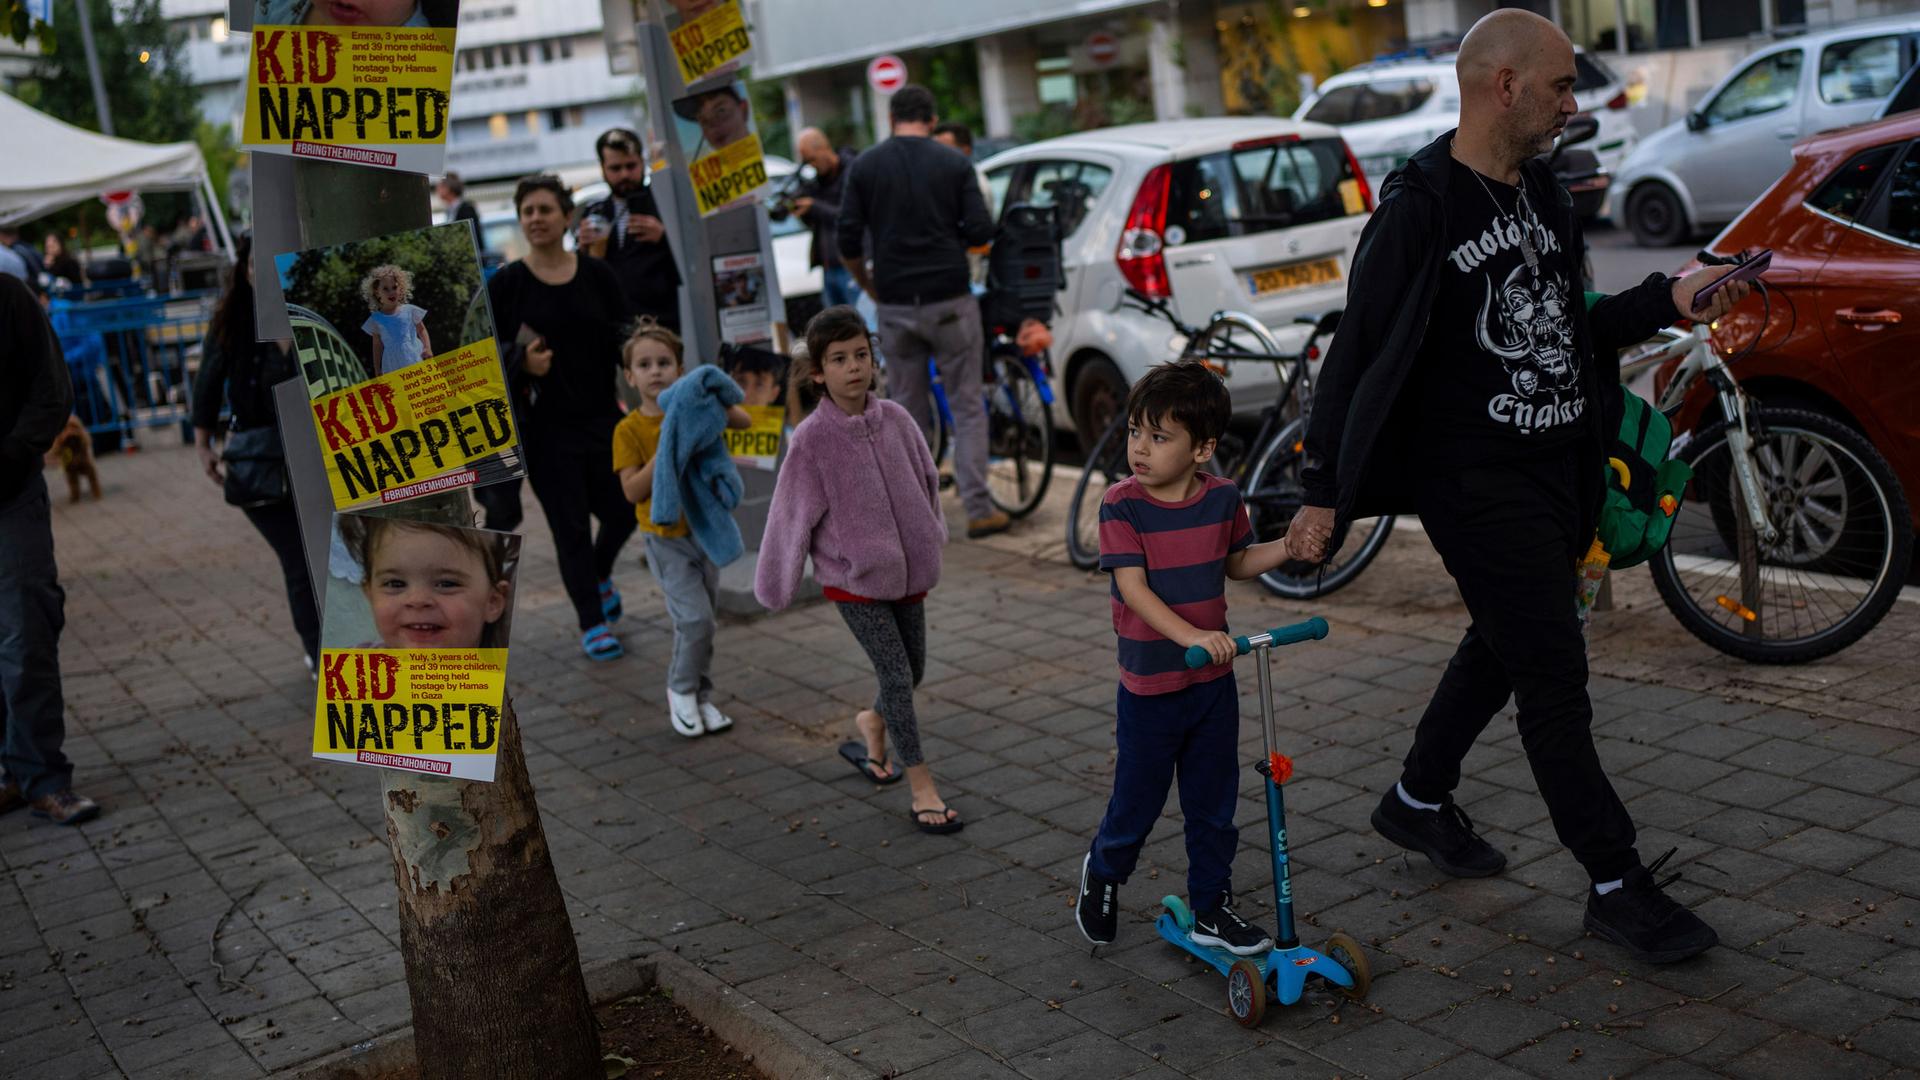 People gather for a protest calling for the return of 40 children who are among the roughly 240 hostages believed held by Hamas militants in the Gaza Strip and to mark World Children's Day, across from UNICEF offices in Tel Aviv, Israel, Monday, Nov. 20, 